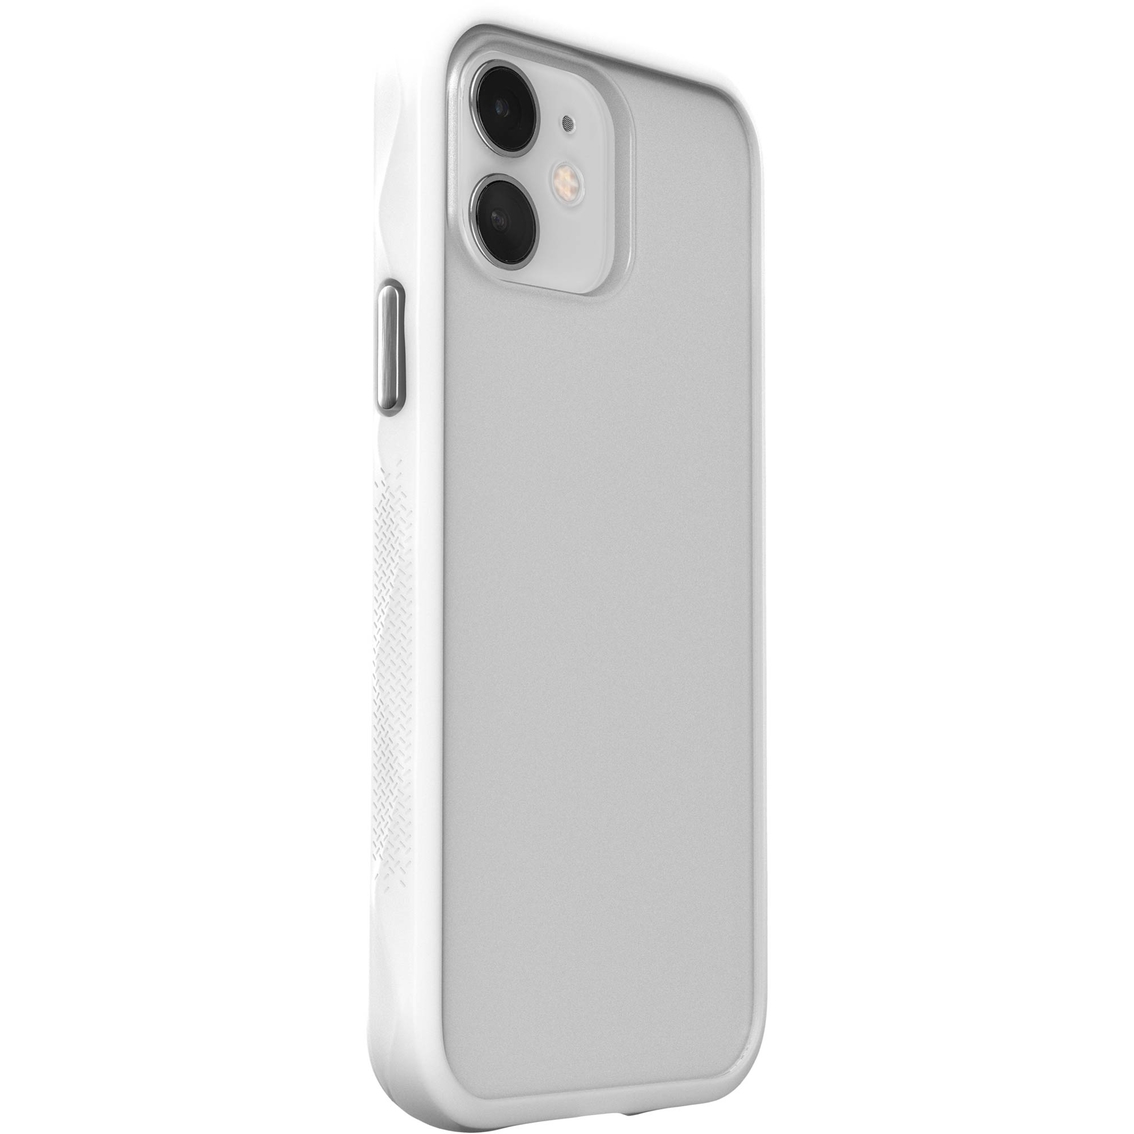 LAUT Design USA Crystal Matter IMPKT 2.0 Case for iPhone 12 Mini - Image 5 of 6